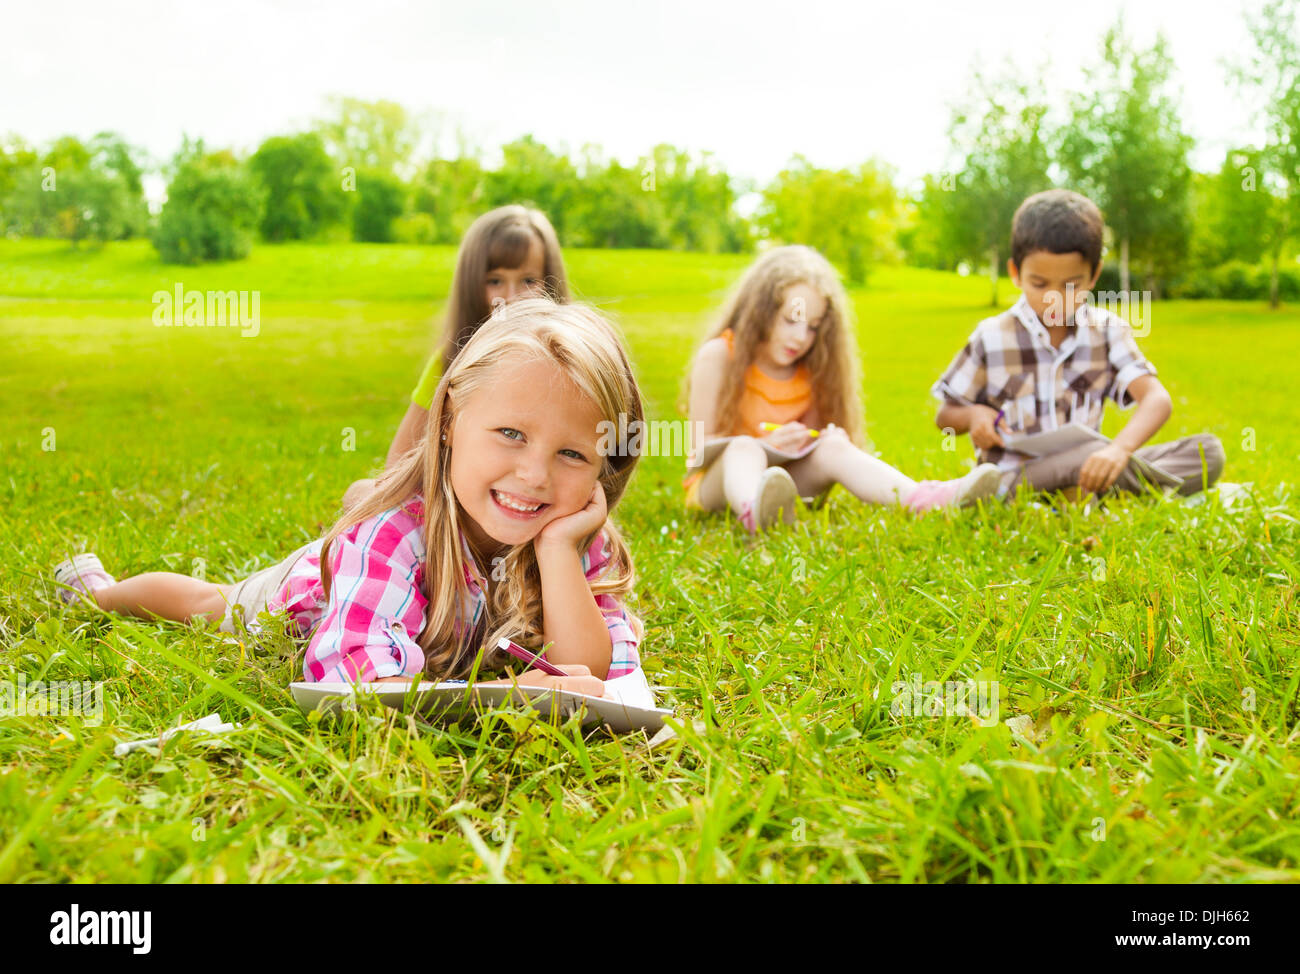 https://c8.alamy.com/comp/DJH662/cute-little-6-years-girl-drawing-in-park-outside-laying-on-the-grass-DJH662.jpg